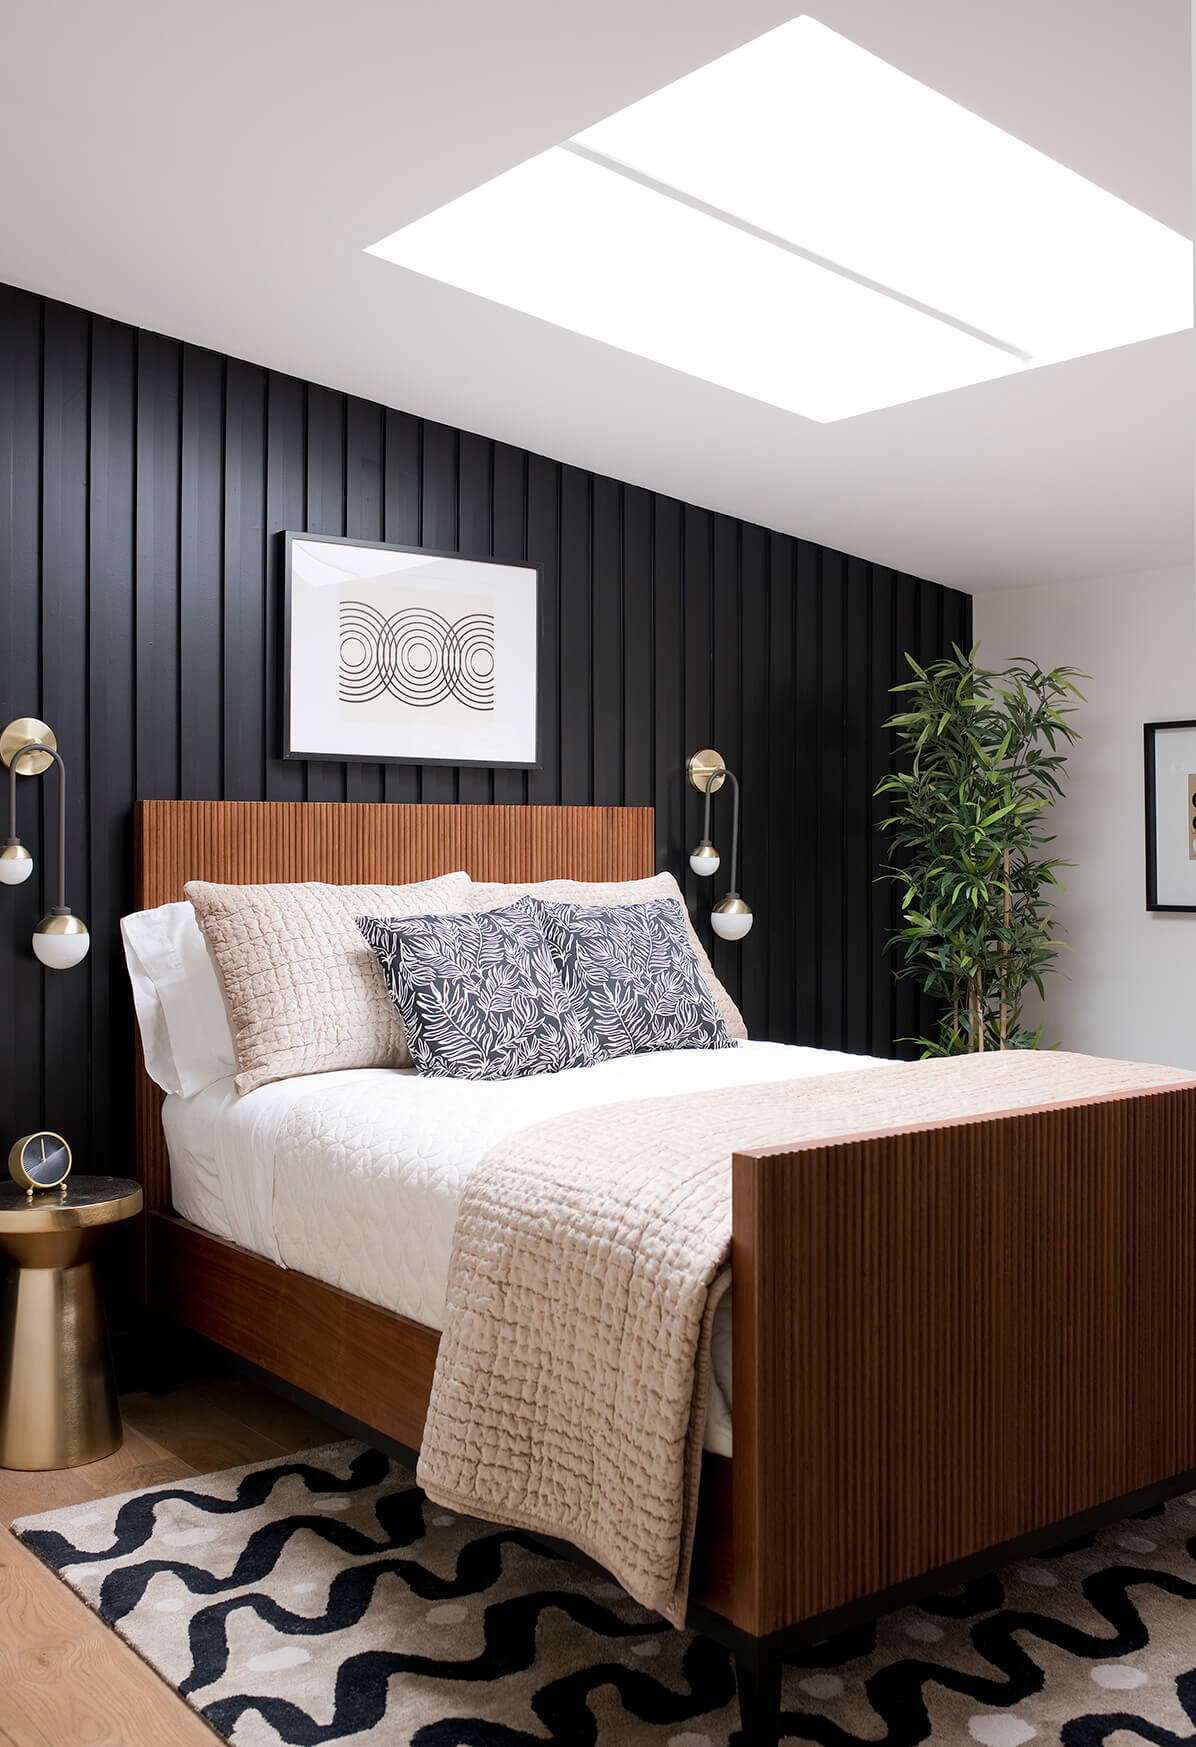 Guest bedroom with black paneled accent wall.